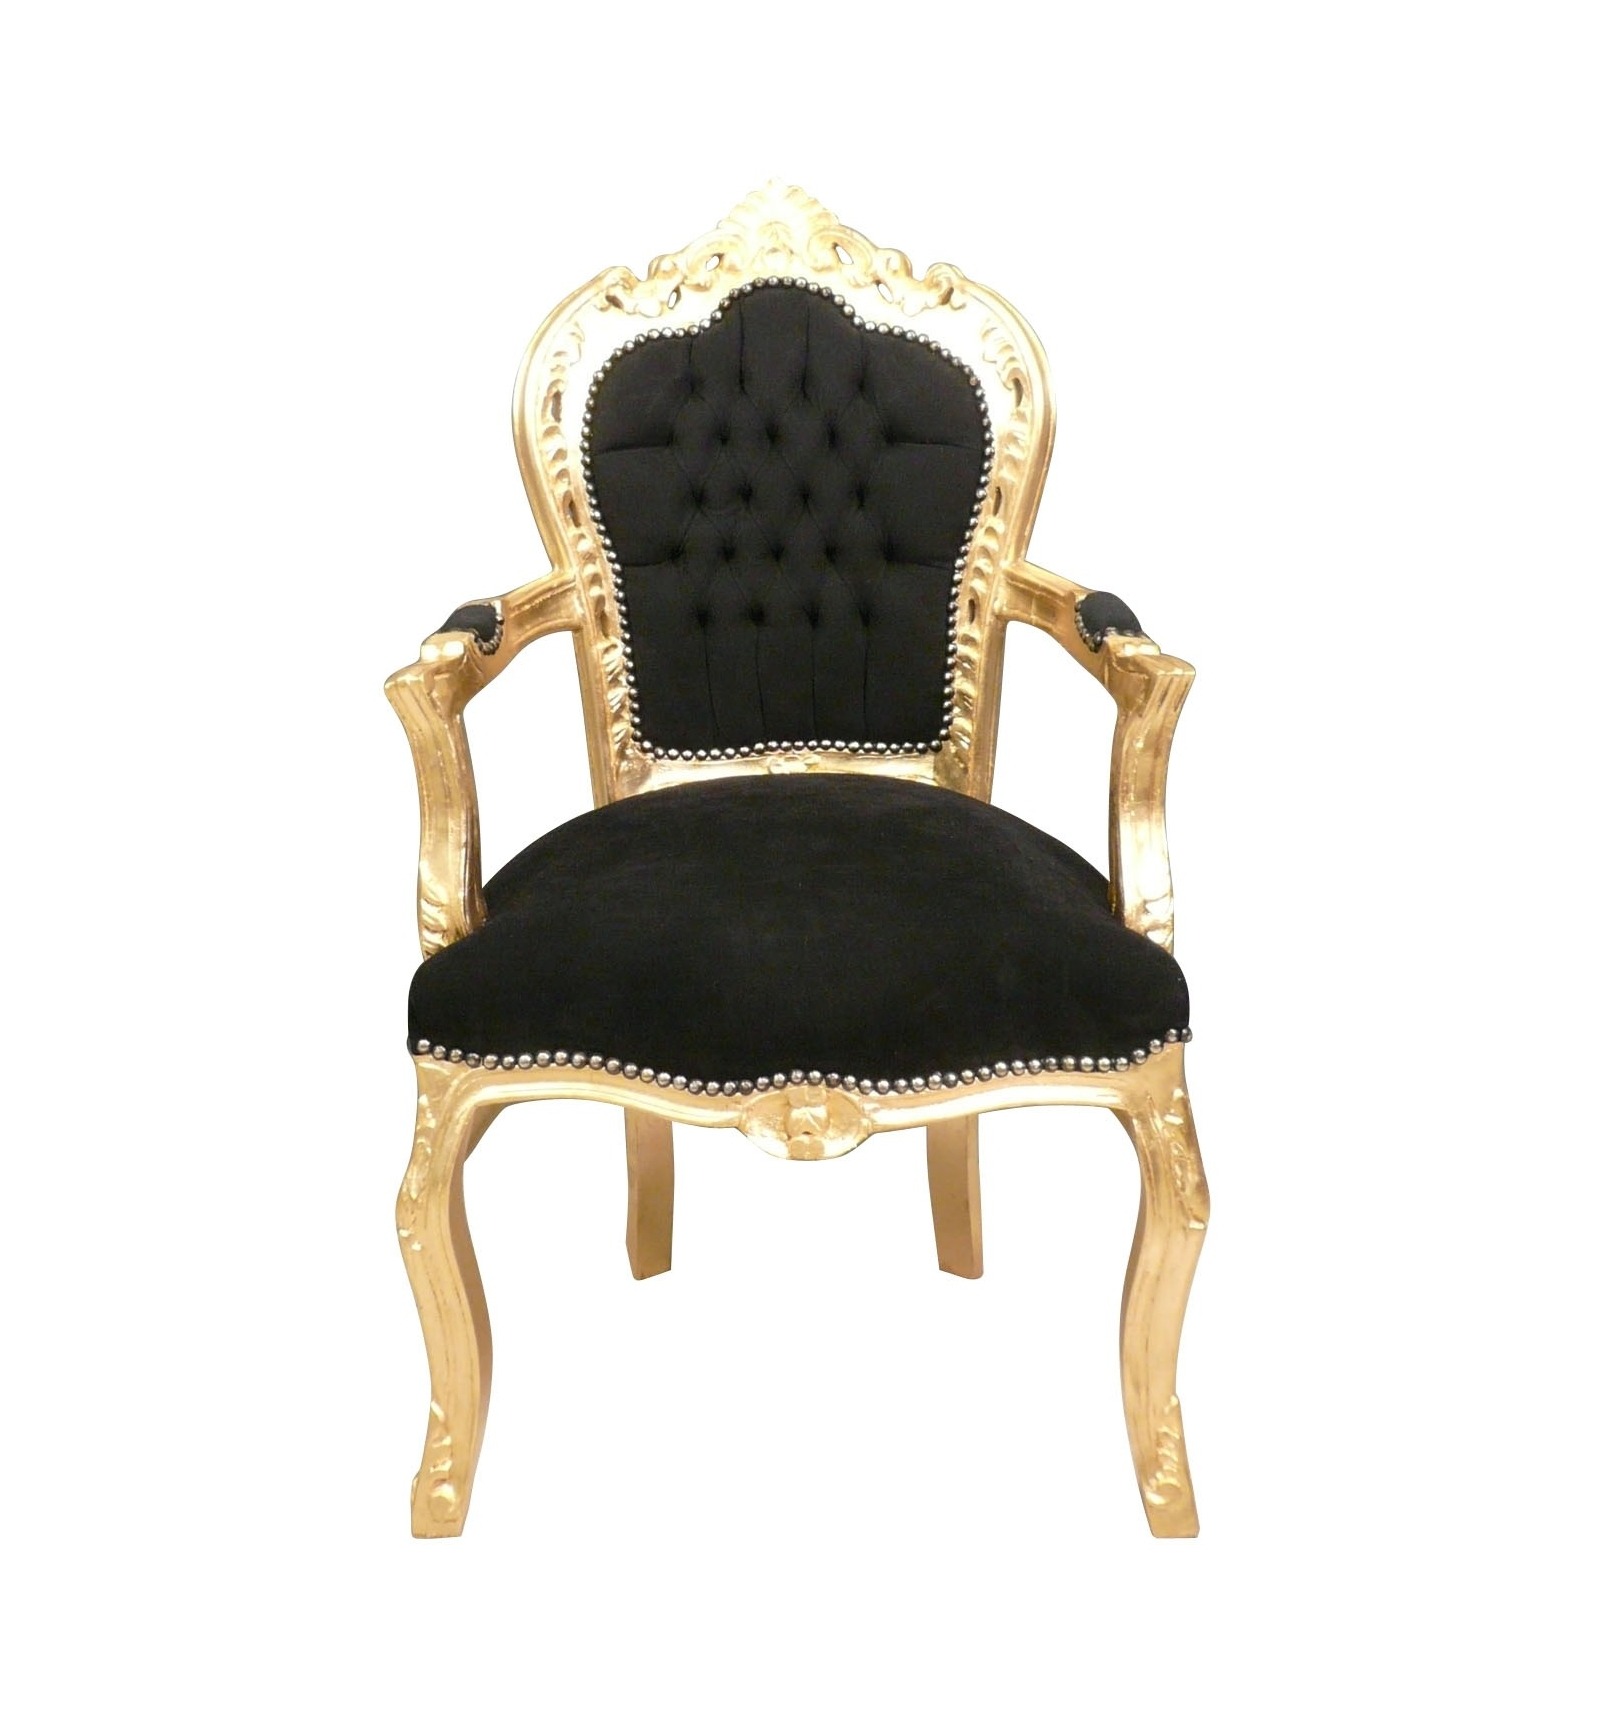 CHAIRS FRANCE BAROQUE STYLE LADY CHAIR WITH ARMRESTS GOLD BLACK #55F3